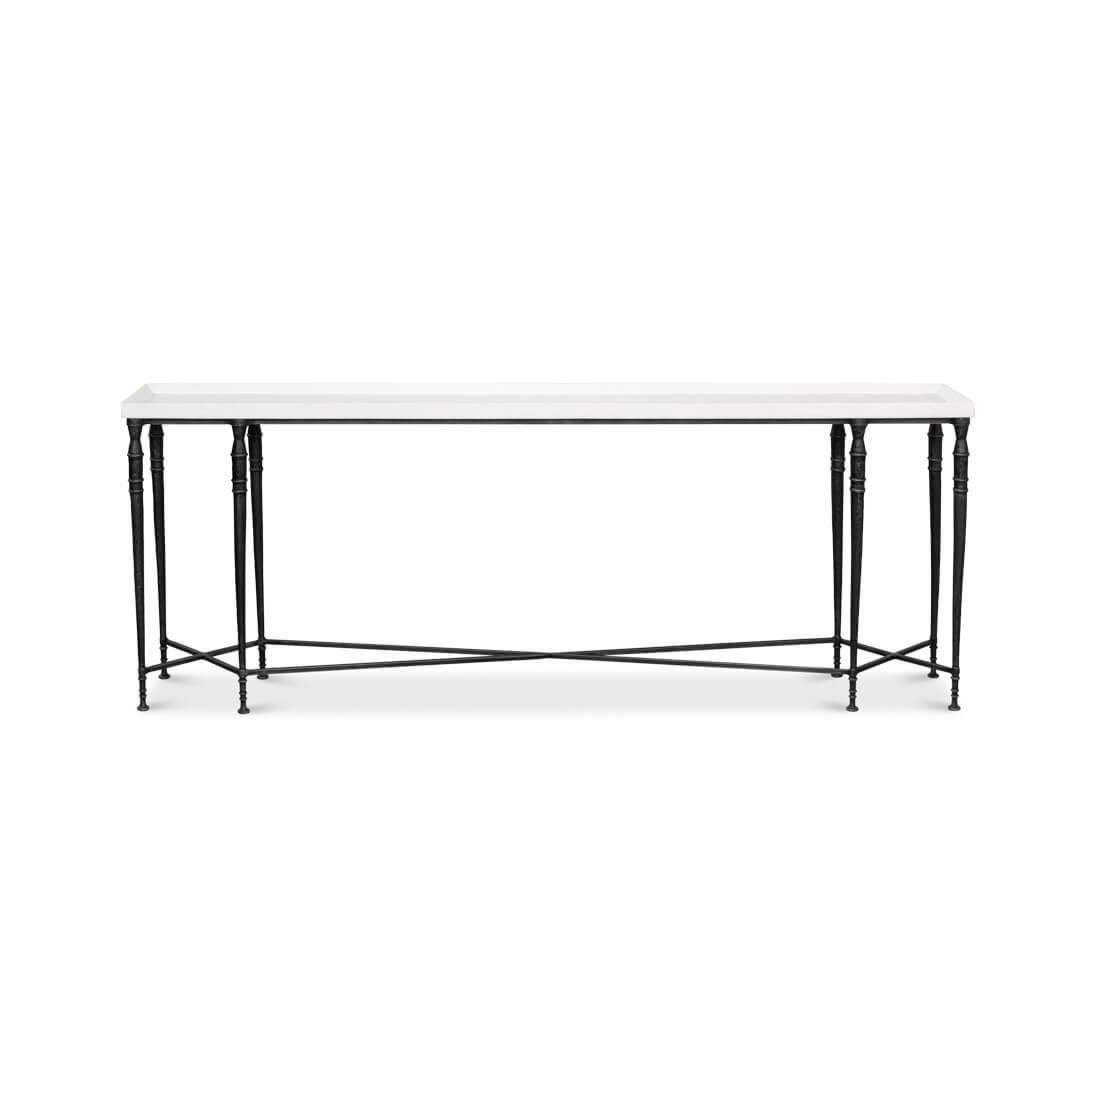 This table features a smooth, off-white tabletop that sits atop a slender black iron frame. The eight iron legs boast subtle ornamental accents that hark back to traditional craftsmanship, while the overall simplicity of the design anchors it firmly